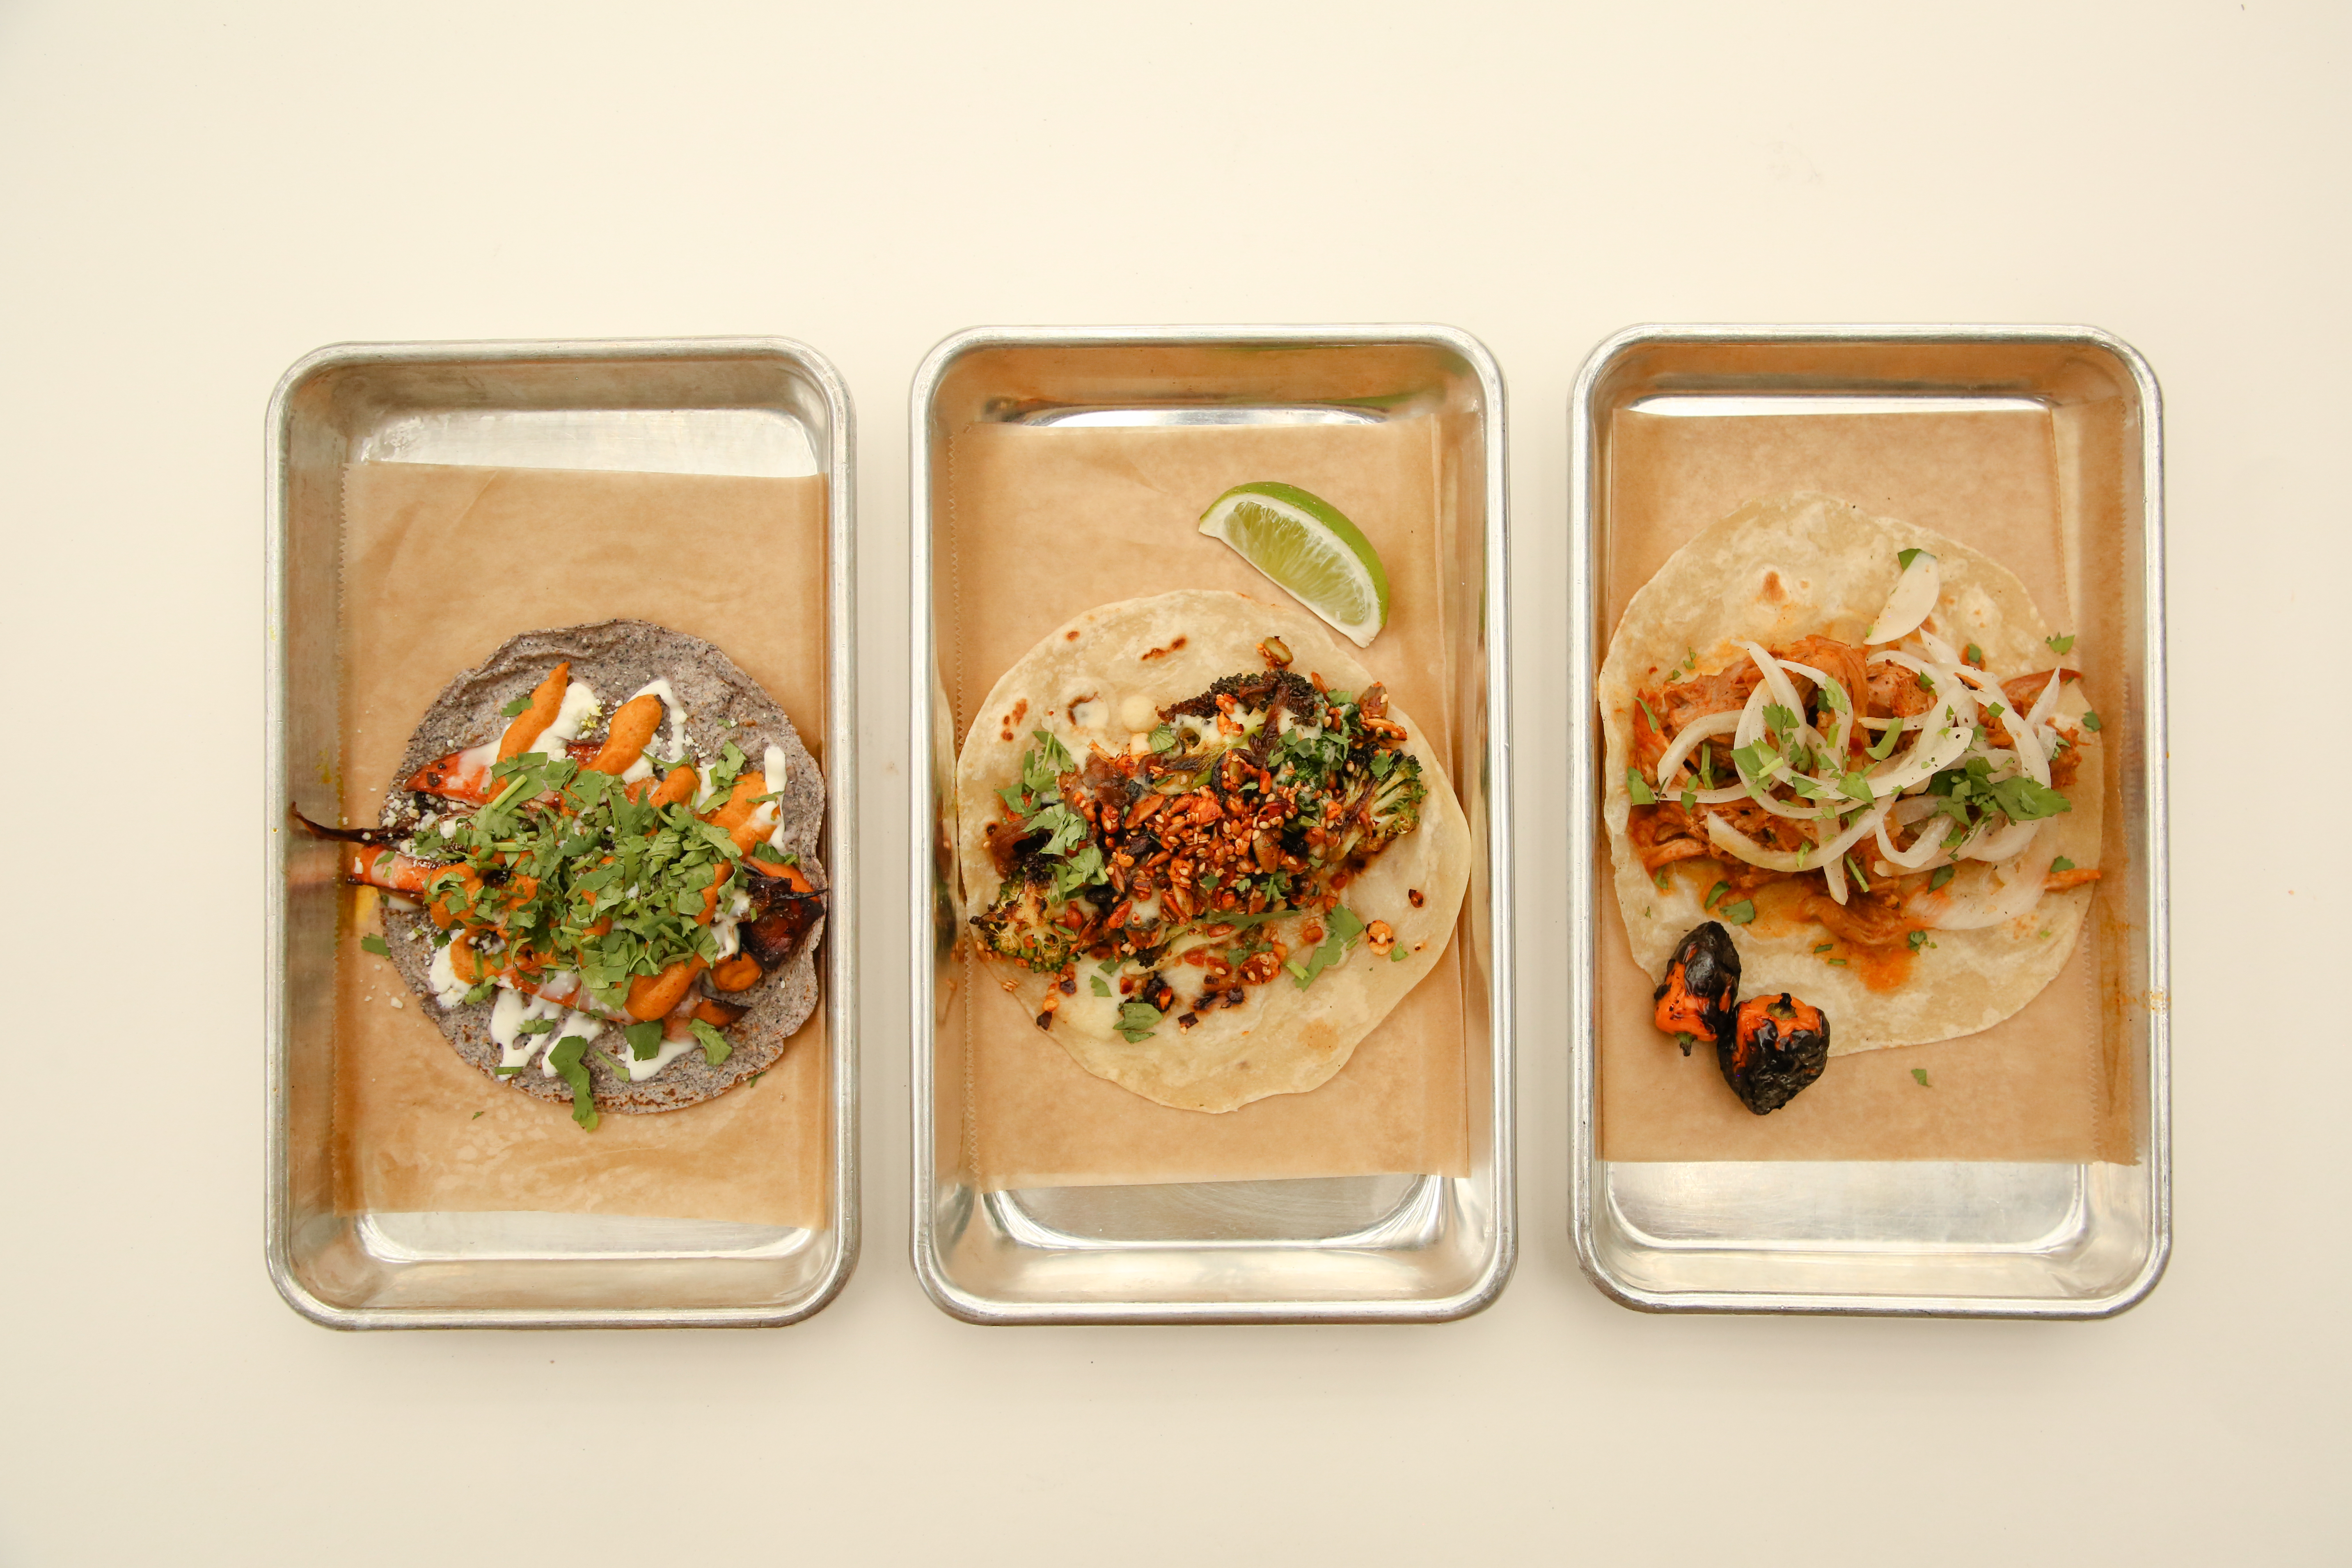 Three silver trays of tacos with brown paper underneath them on a beige background. 